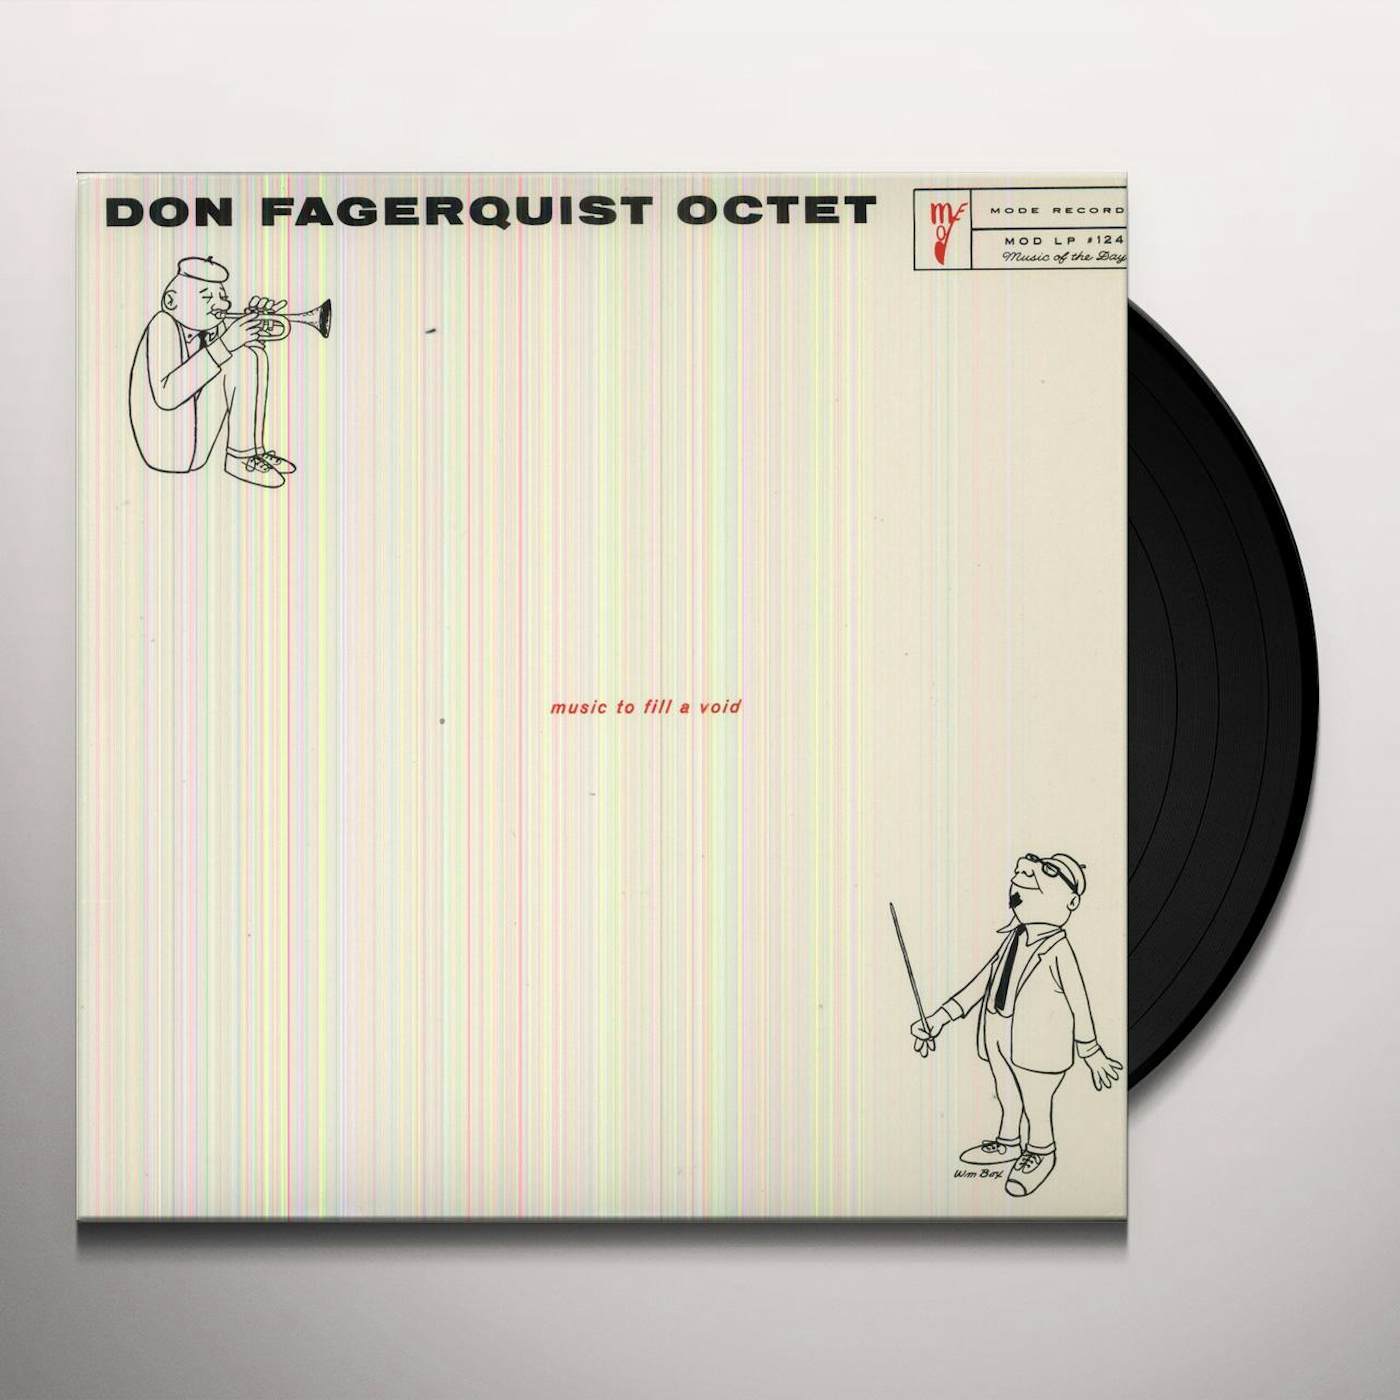 Don Fagerquist EIGHT BY EIGHT: MUSIC TO FILL A VOID Vinyl Record